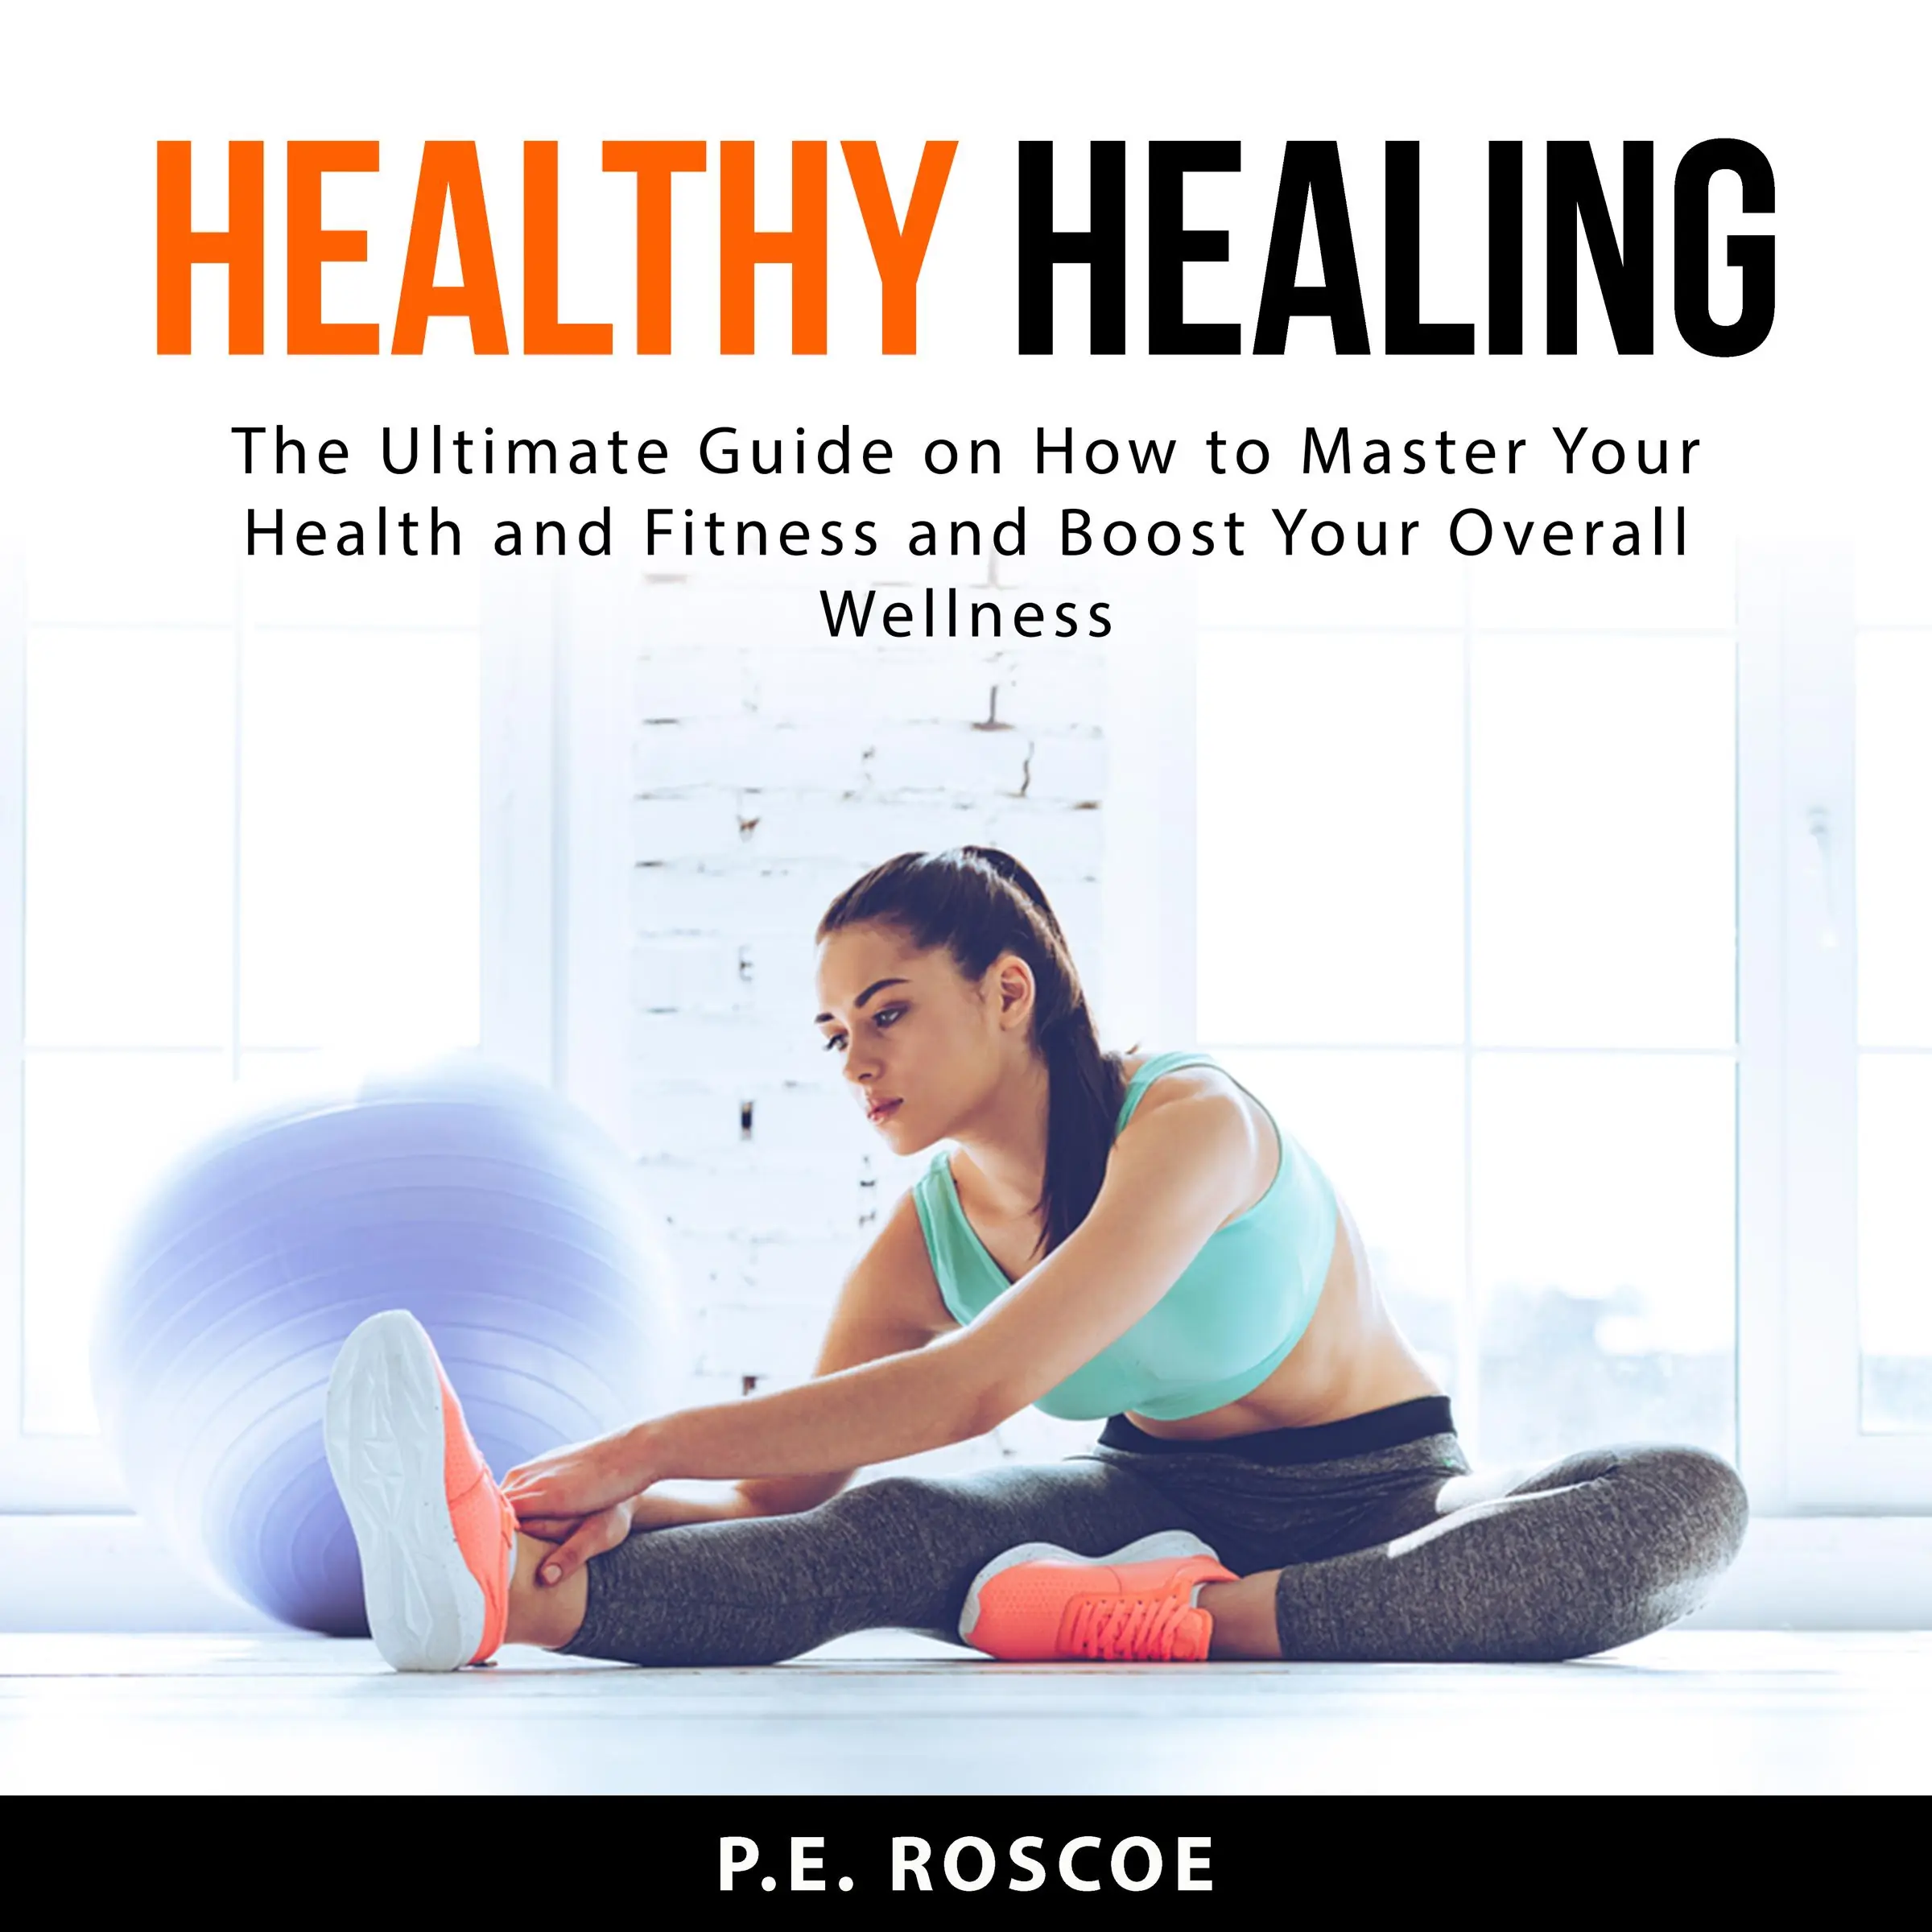 Healthy Healing: The Ultimate Guide on How to Master Your Health and Fitness and Boost Your Overall Wellness Audiobook by P.E. Roscoe